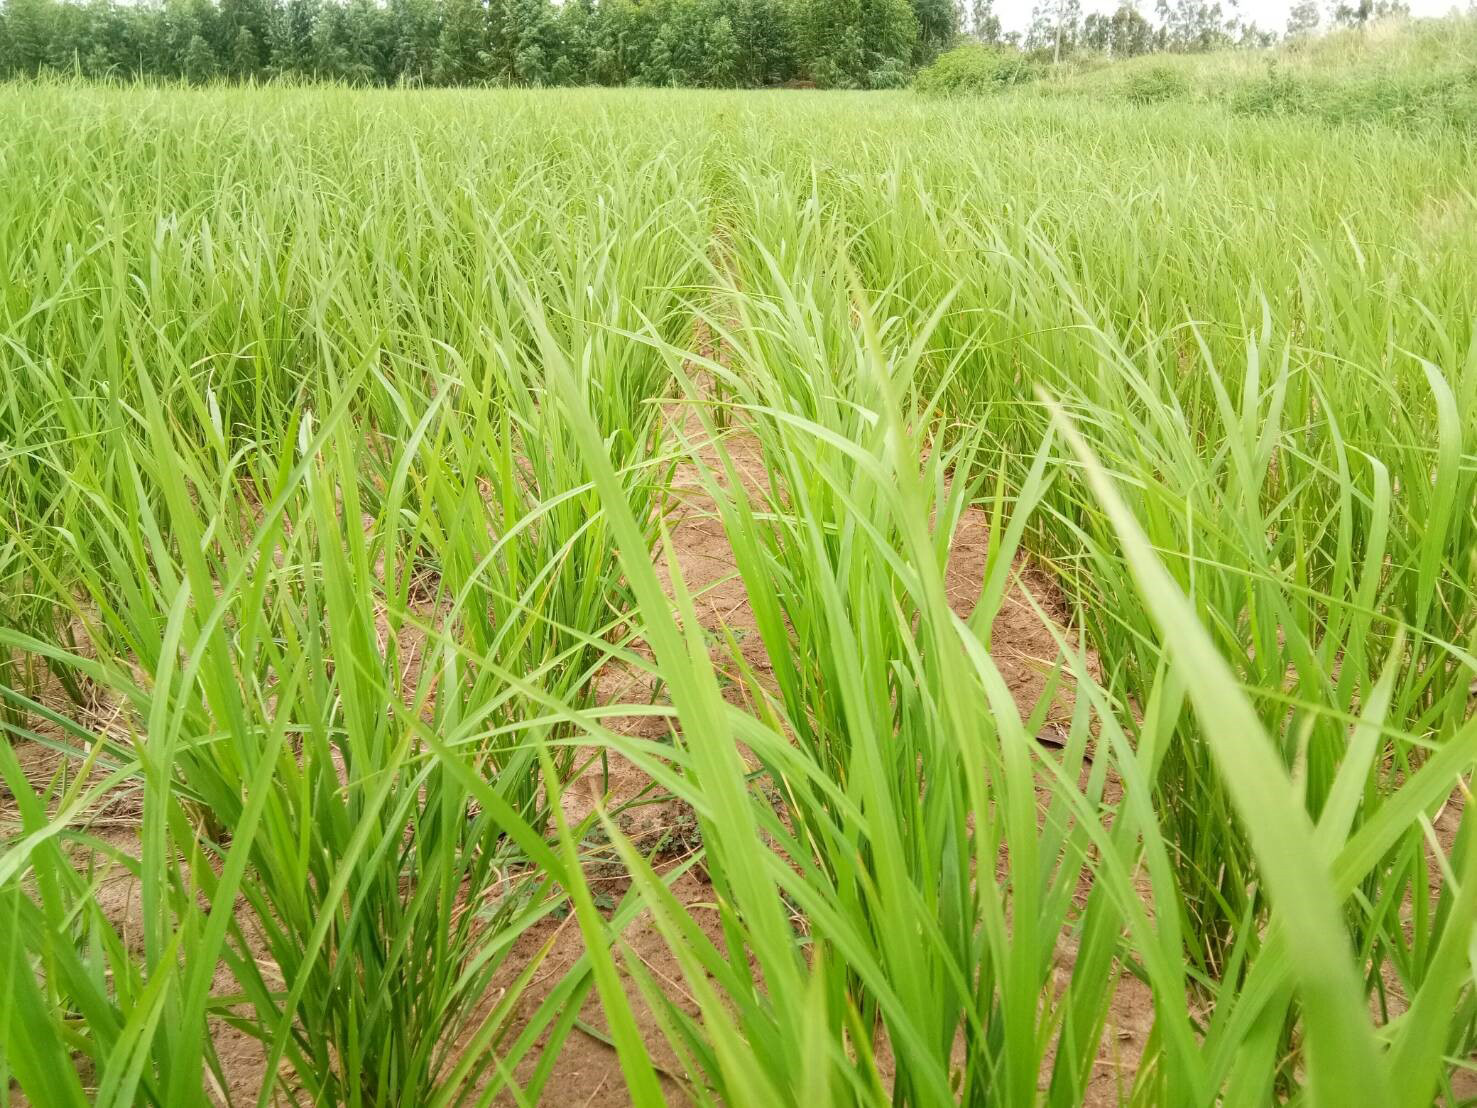 Field in Roi Ei province is doing well despite the decrease in water and fertiliser.